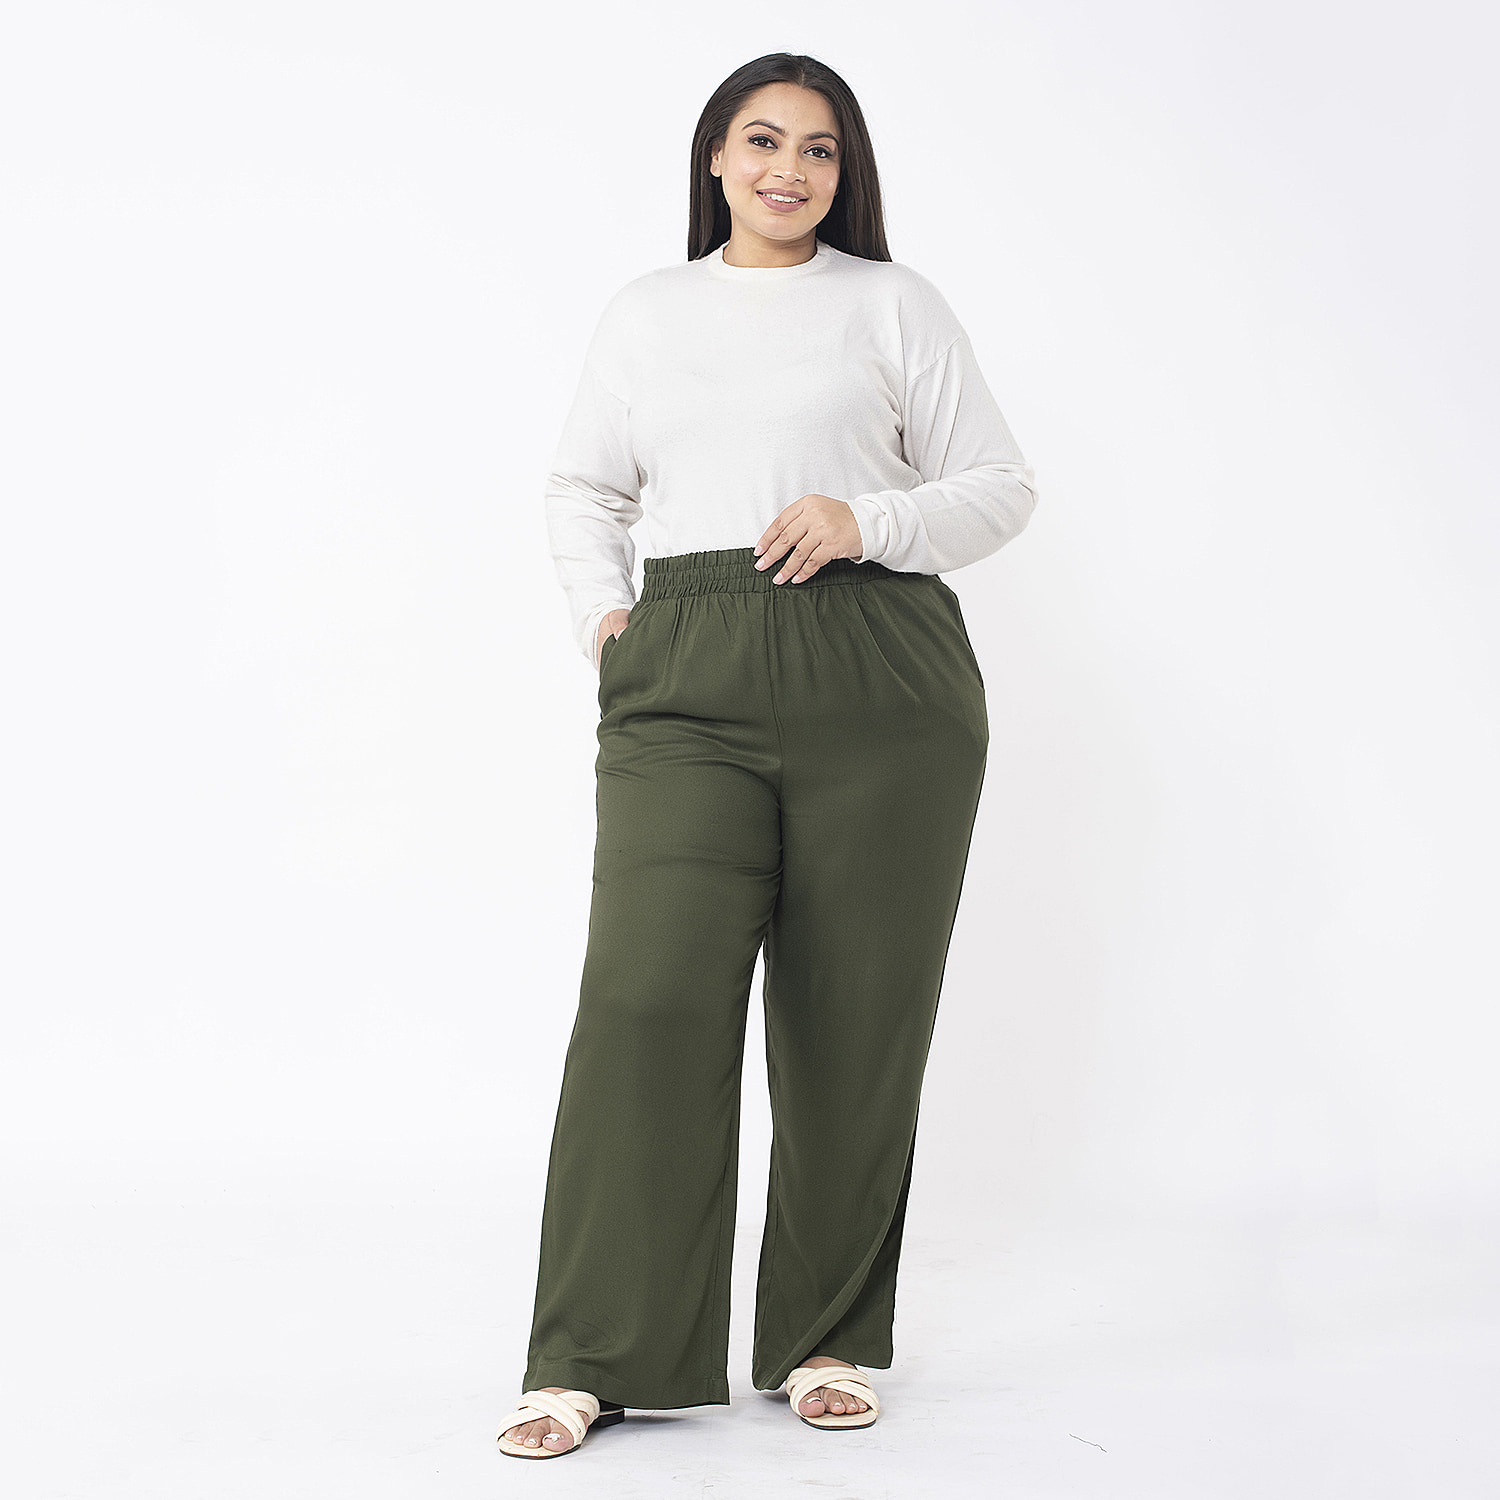 Tamsy-Viscose-Solid-Jean-and-Pant-Trouser-Size-103x1-cm-Khaki-Navy